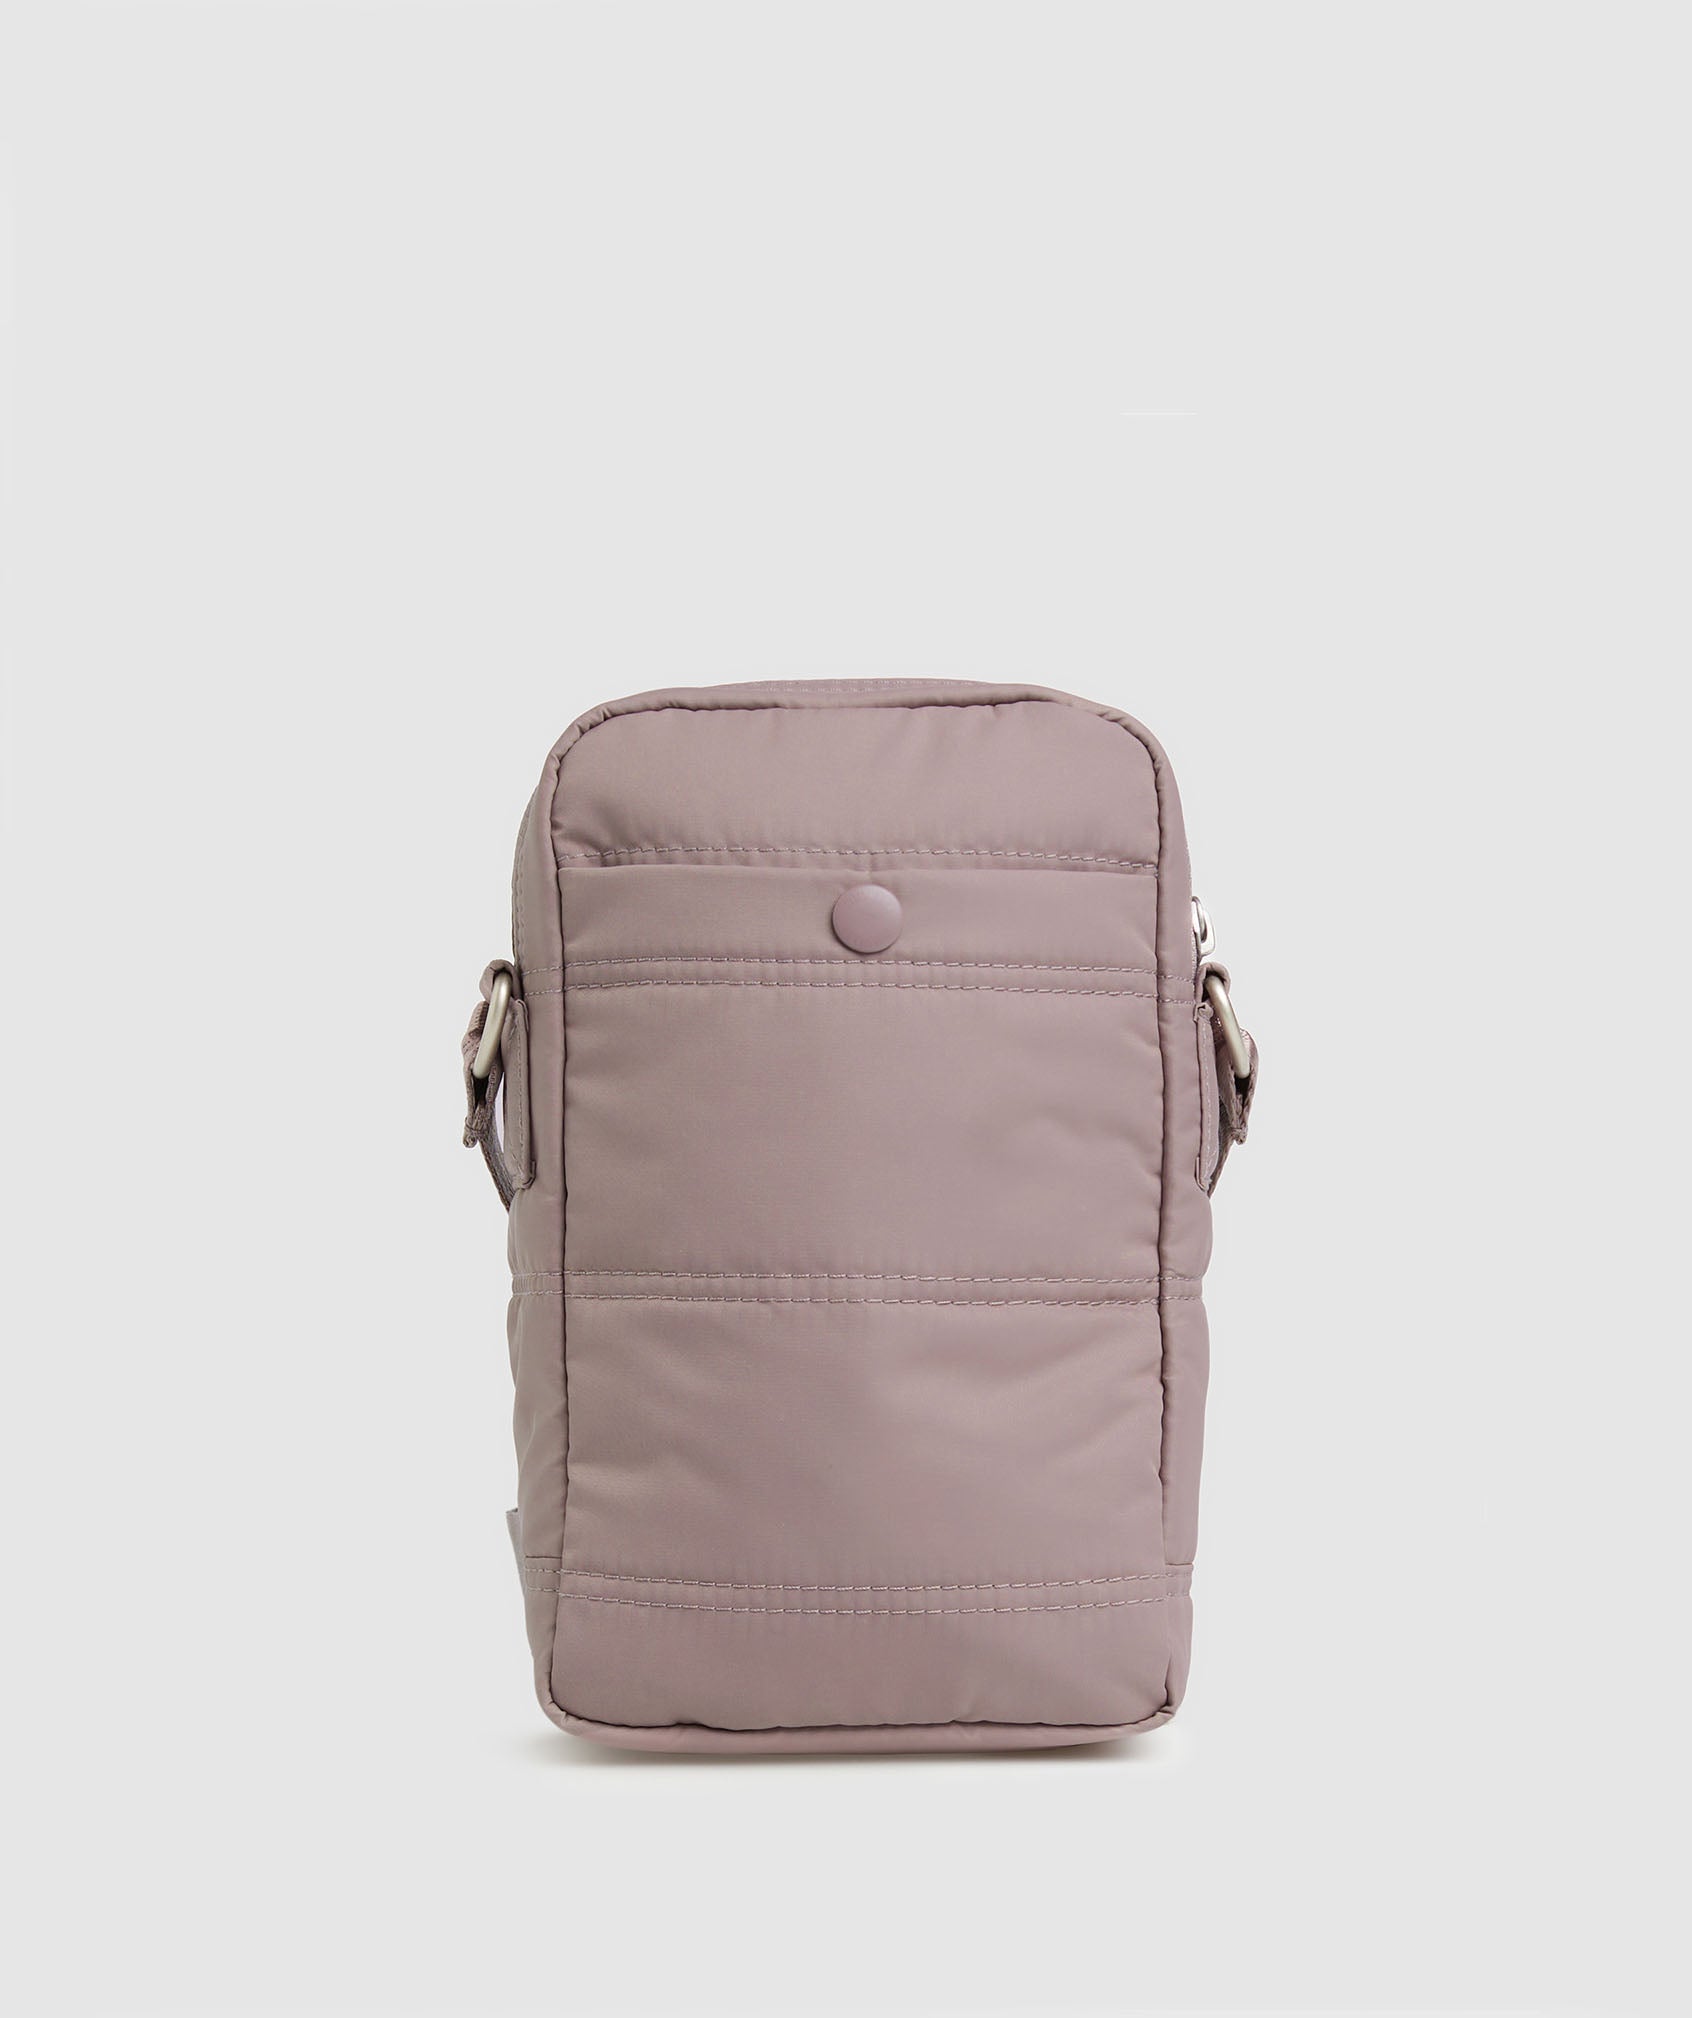 Premium Lifestyle Cross Body in Washed Mauve - view 2